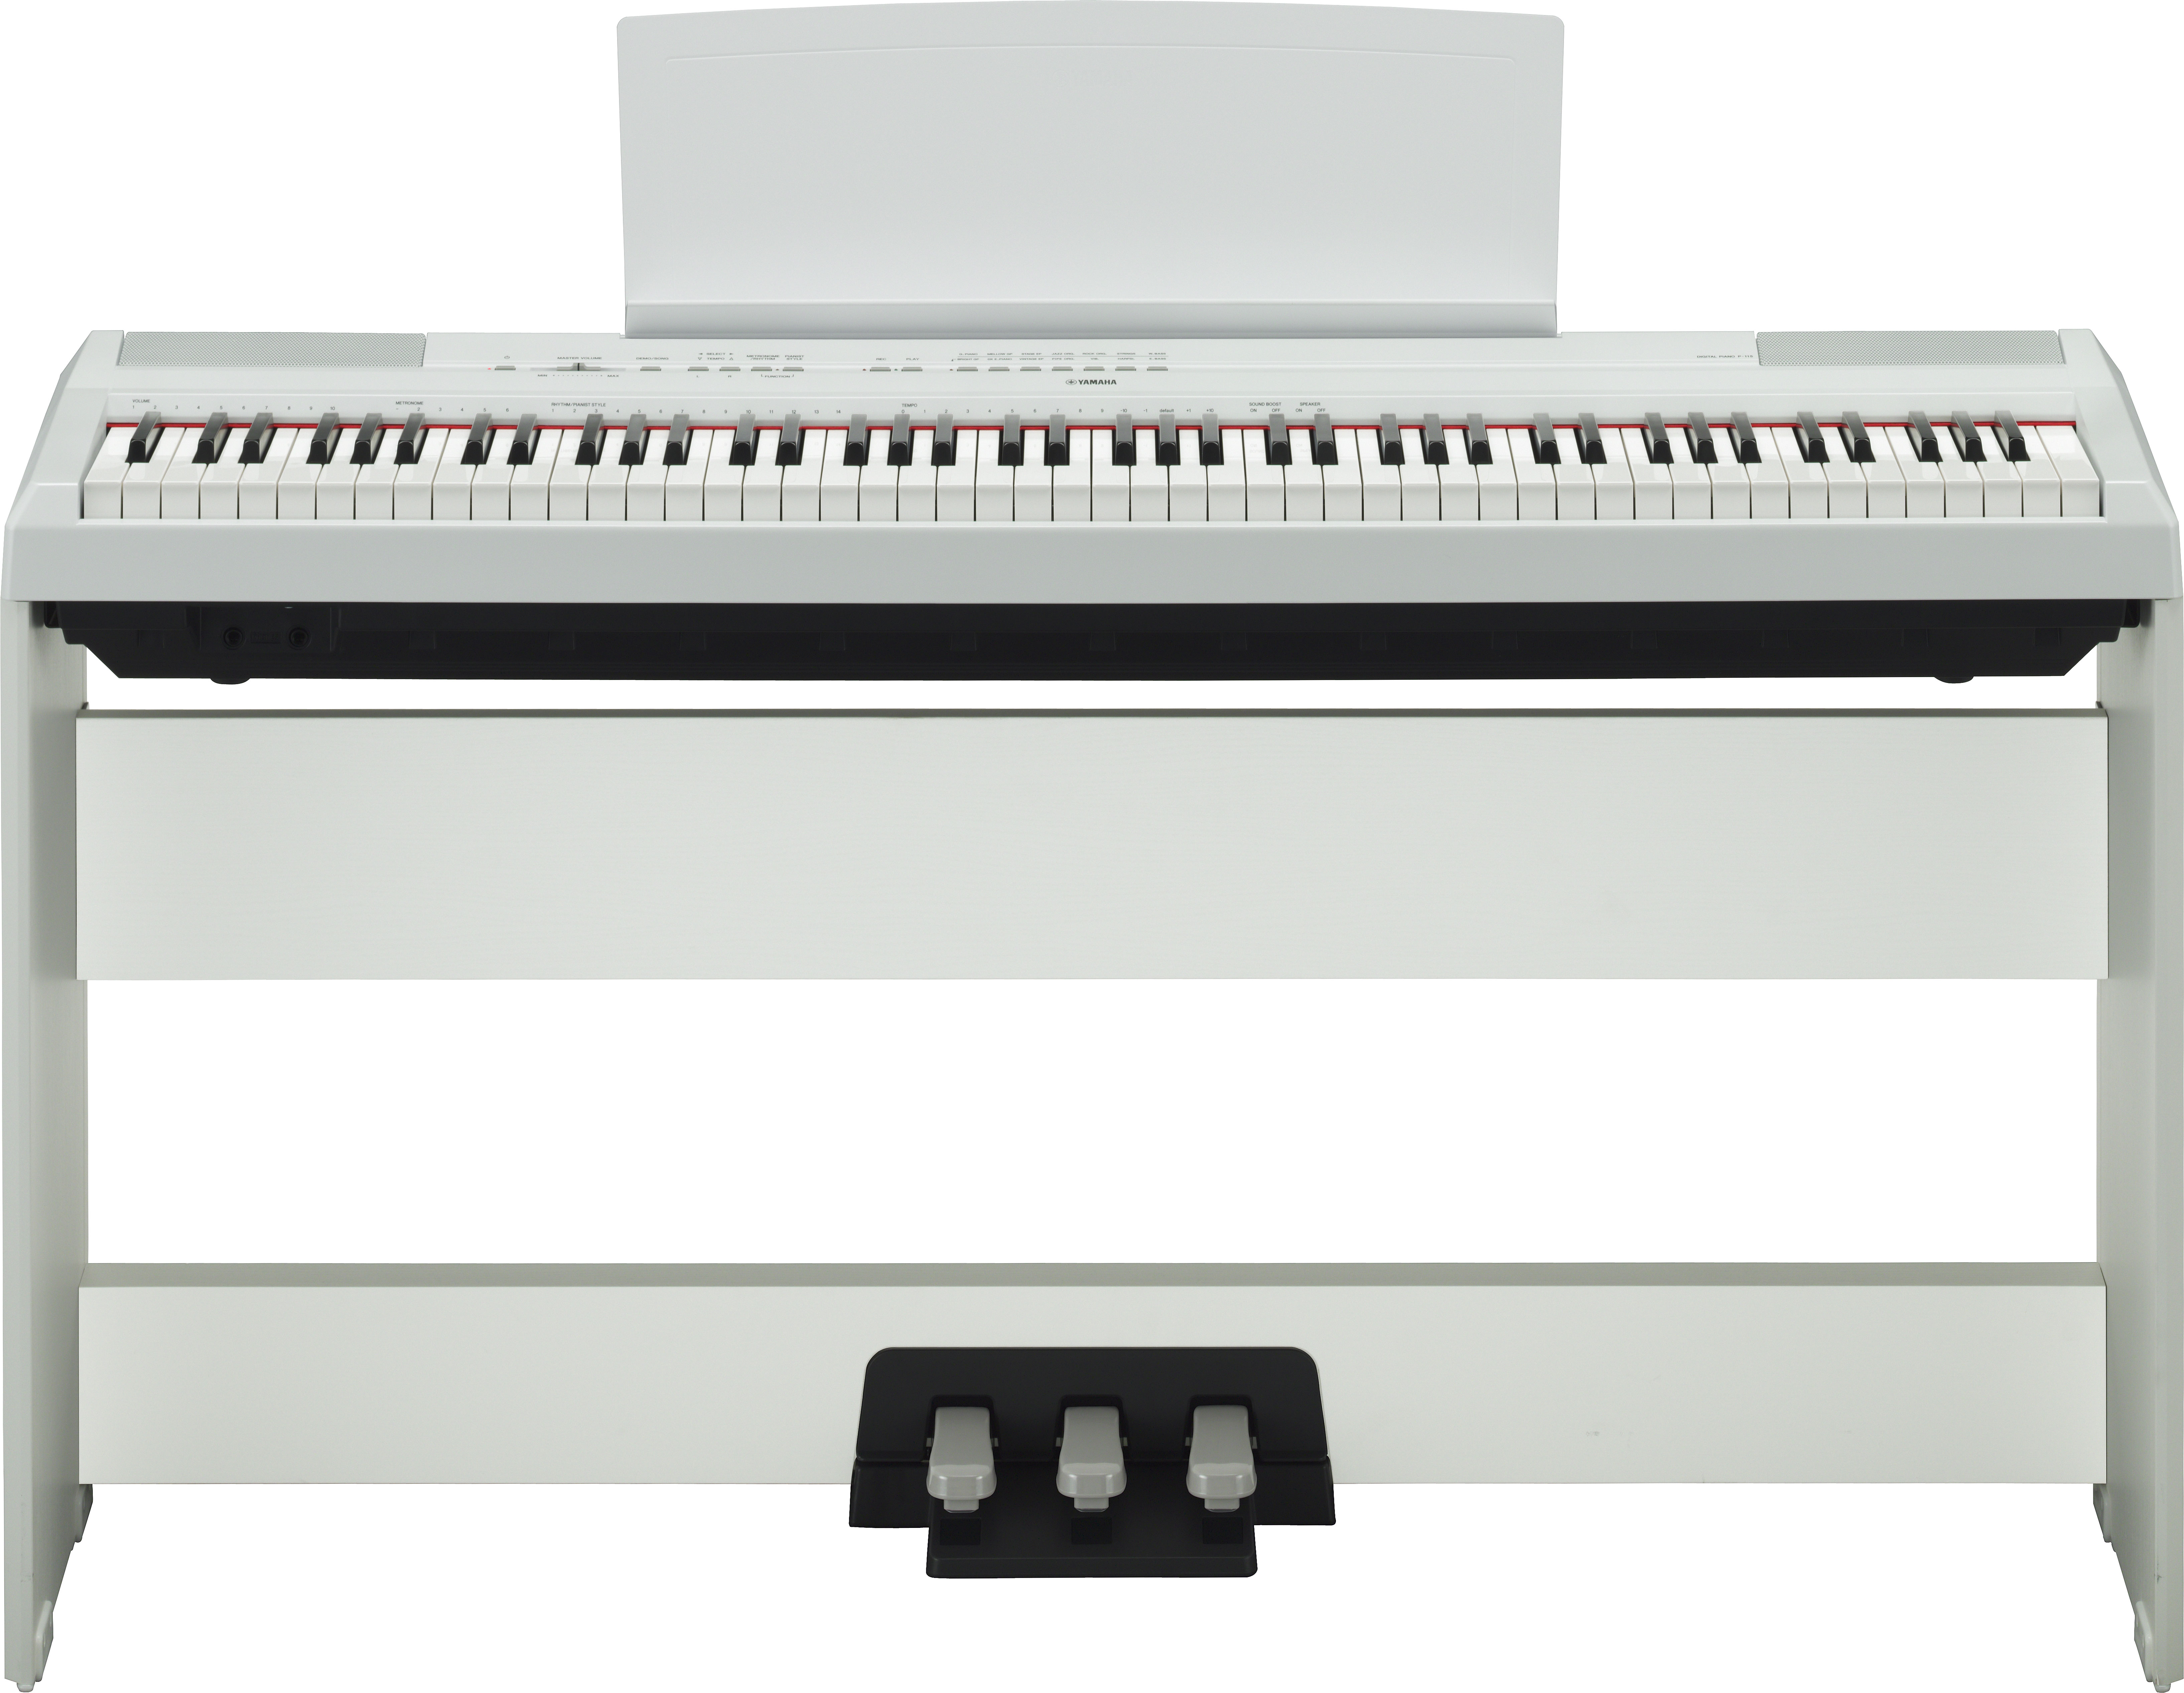 P-115 ???? : P-115 - Yamaha P-115 - Audiofanzine / The yamaha p115 digital piano is not only an excellent piano for beginners or students;